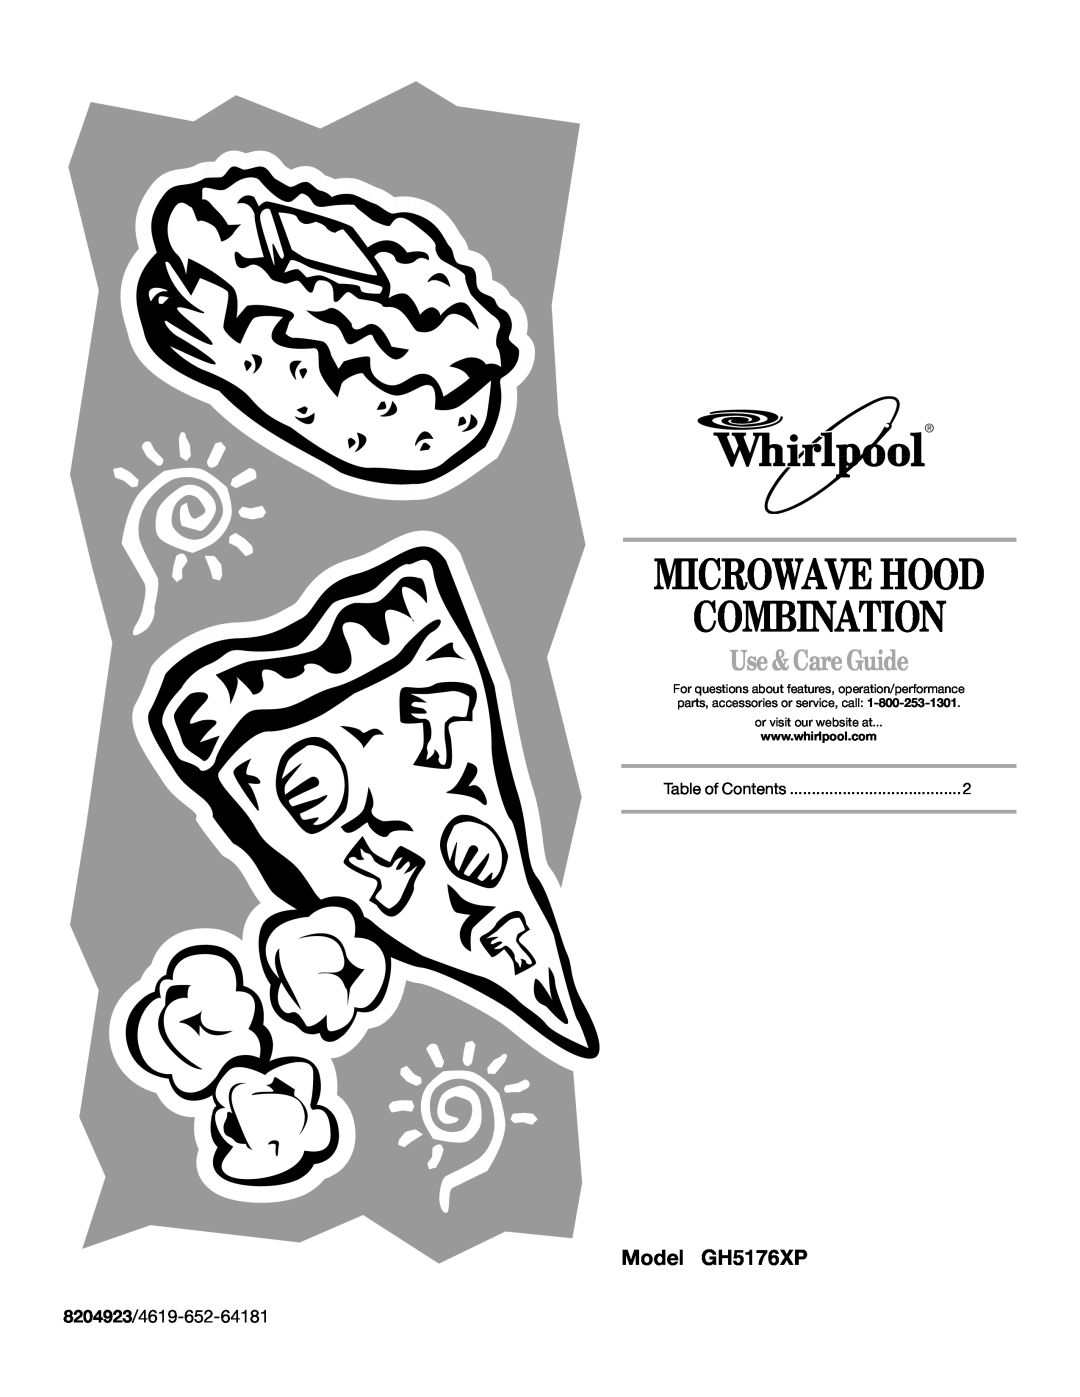 Whirlpool manual Model GH5176XP, 8204923/4619-652-64181, Microwave Hood Combination, Use & Care Guide 